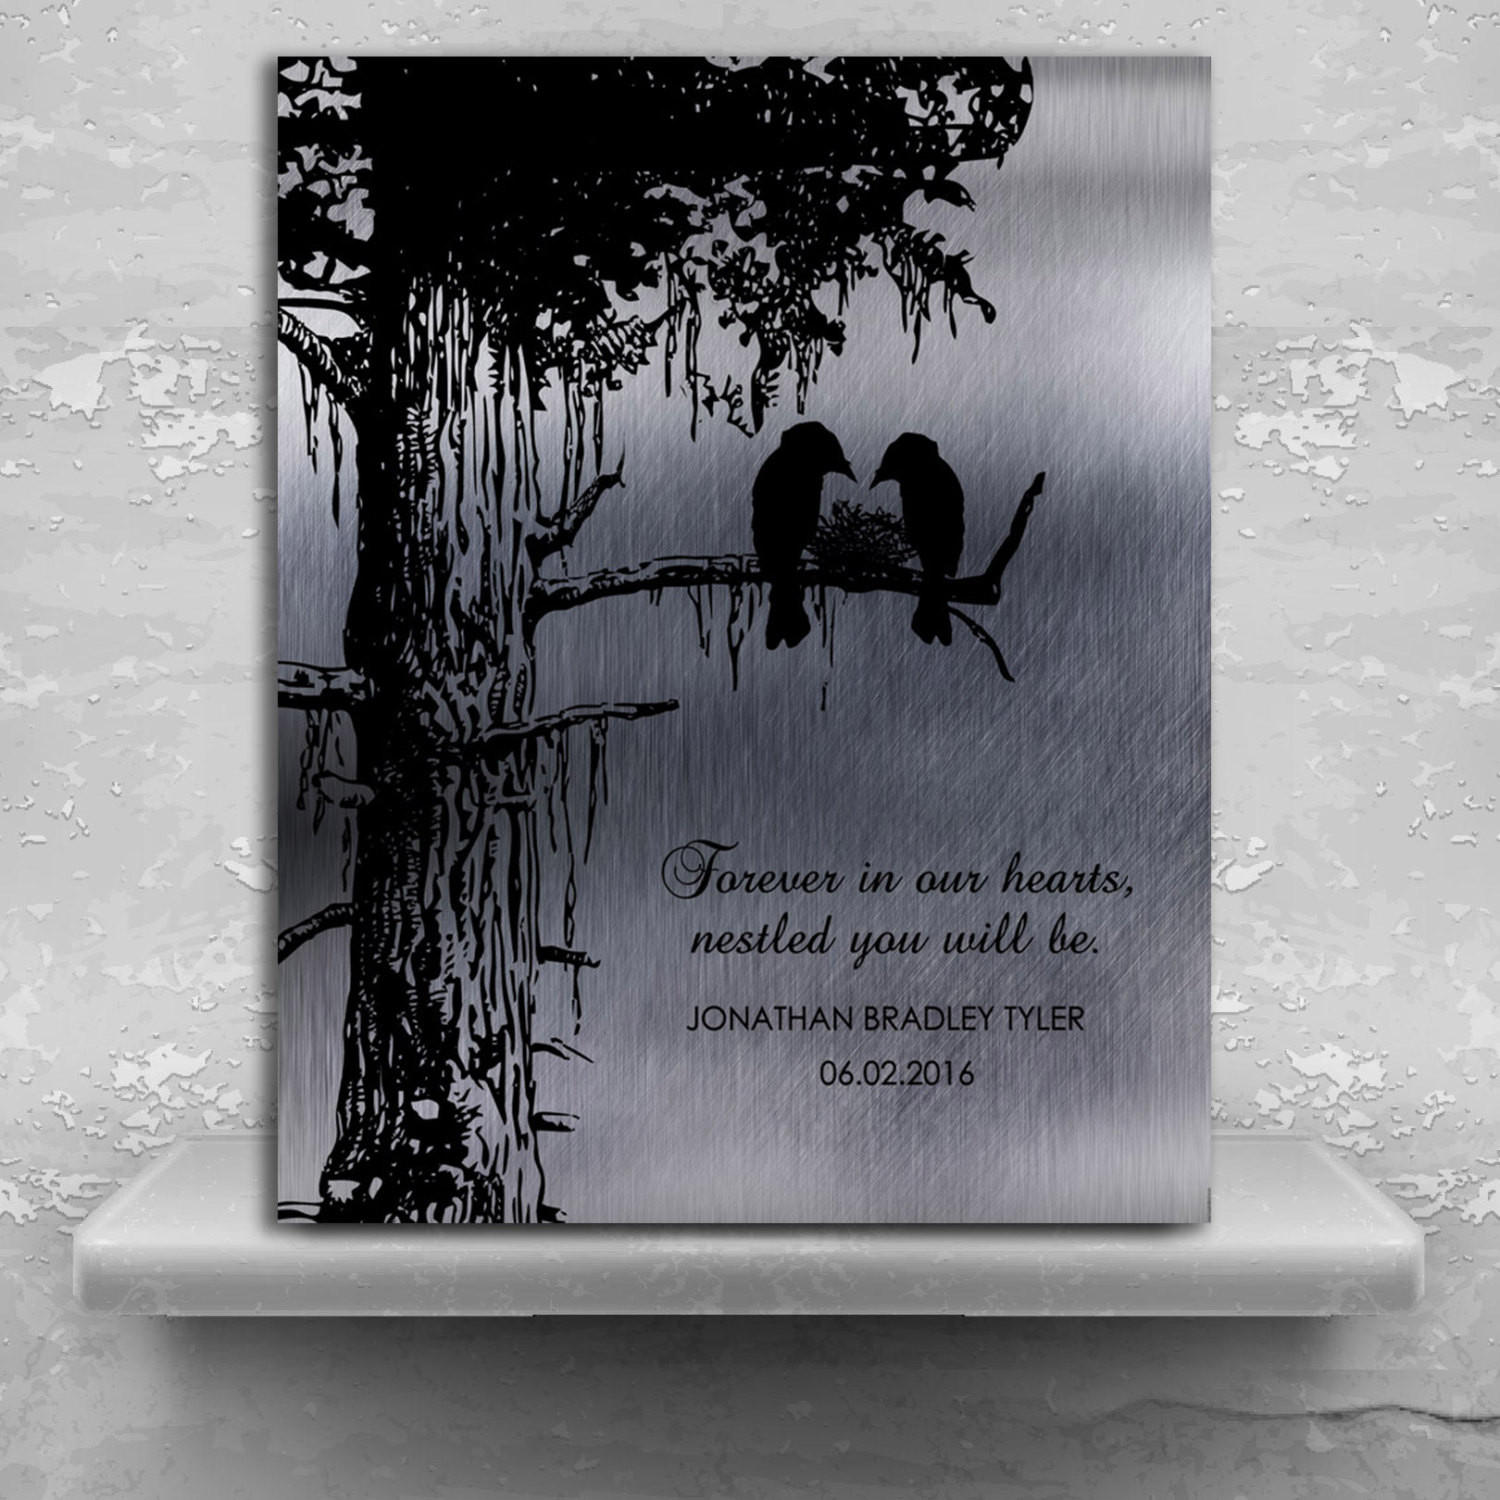 Memorial Gifts For Loss Of A Child
 Sympathy Gift of Condolence Memorial Plaque Loss of Baby Child